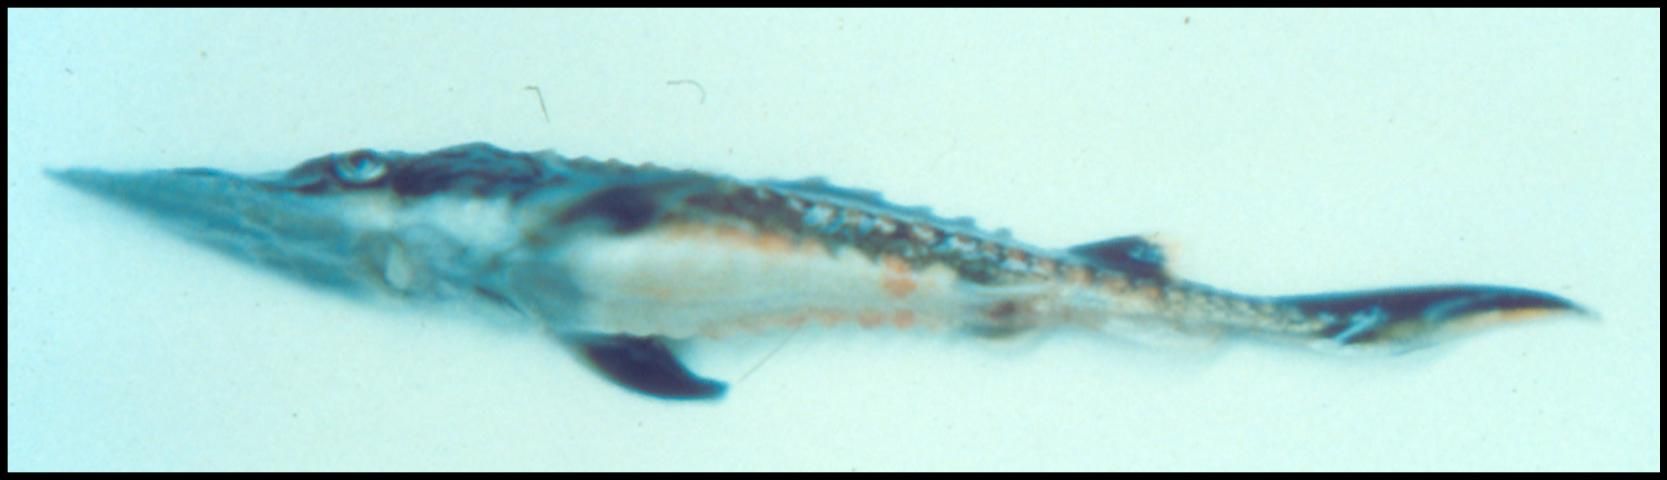 Figure 1. Bloody areas caused by a Strep infection are visible on the underside, along the side, and at the edge of the tail fin of this juvenile sturgeon.